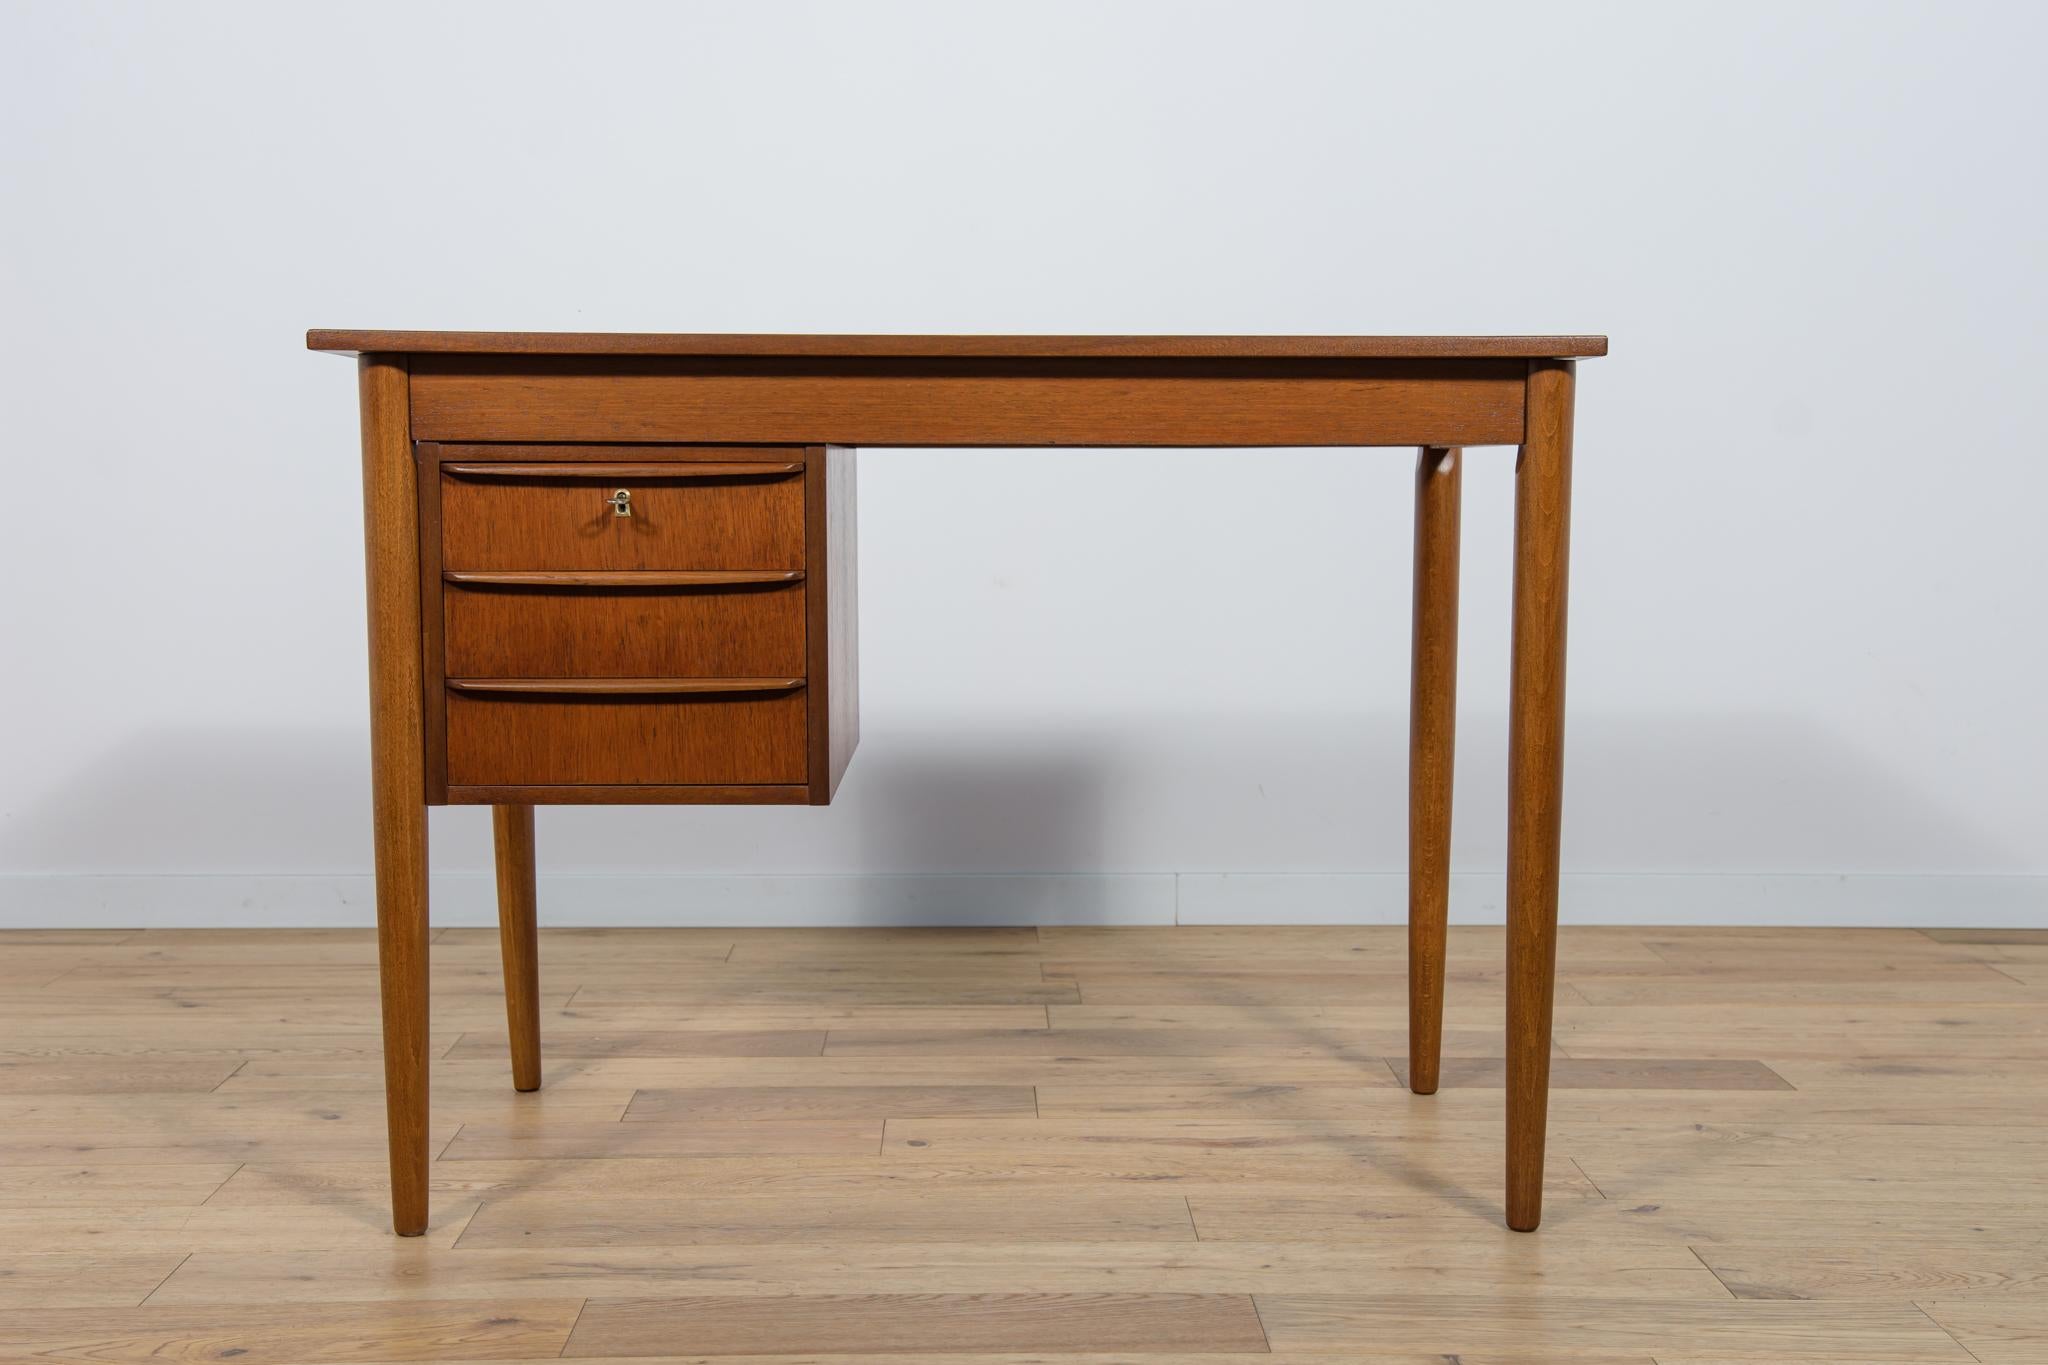 
A small desk made in the 1960s in Denmark. It has a module with three drawers with contoured handles. The desk has been professionally renovated and is made of teak wood. It has been cleaned of the old coating, painted with an oak-colored stain and